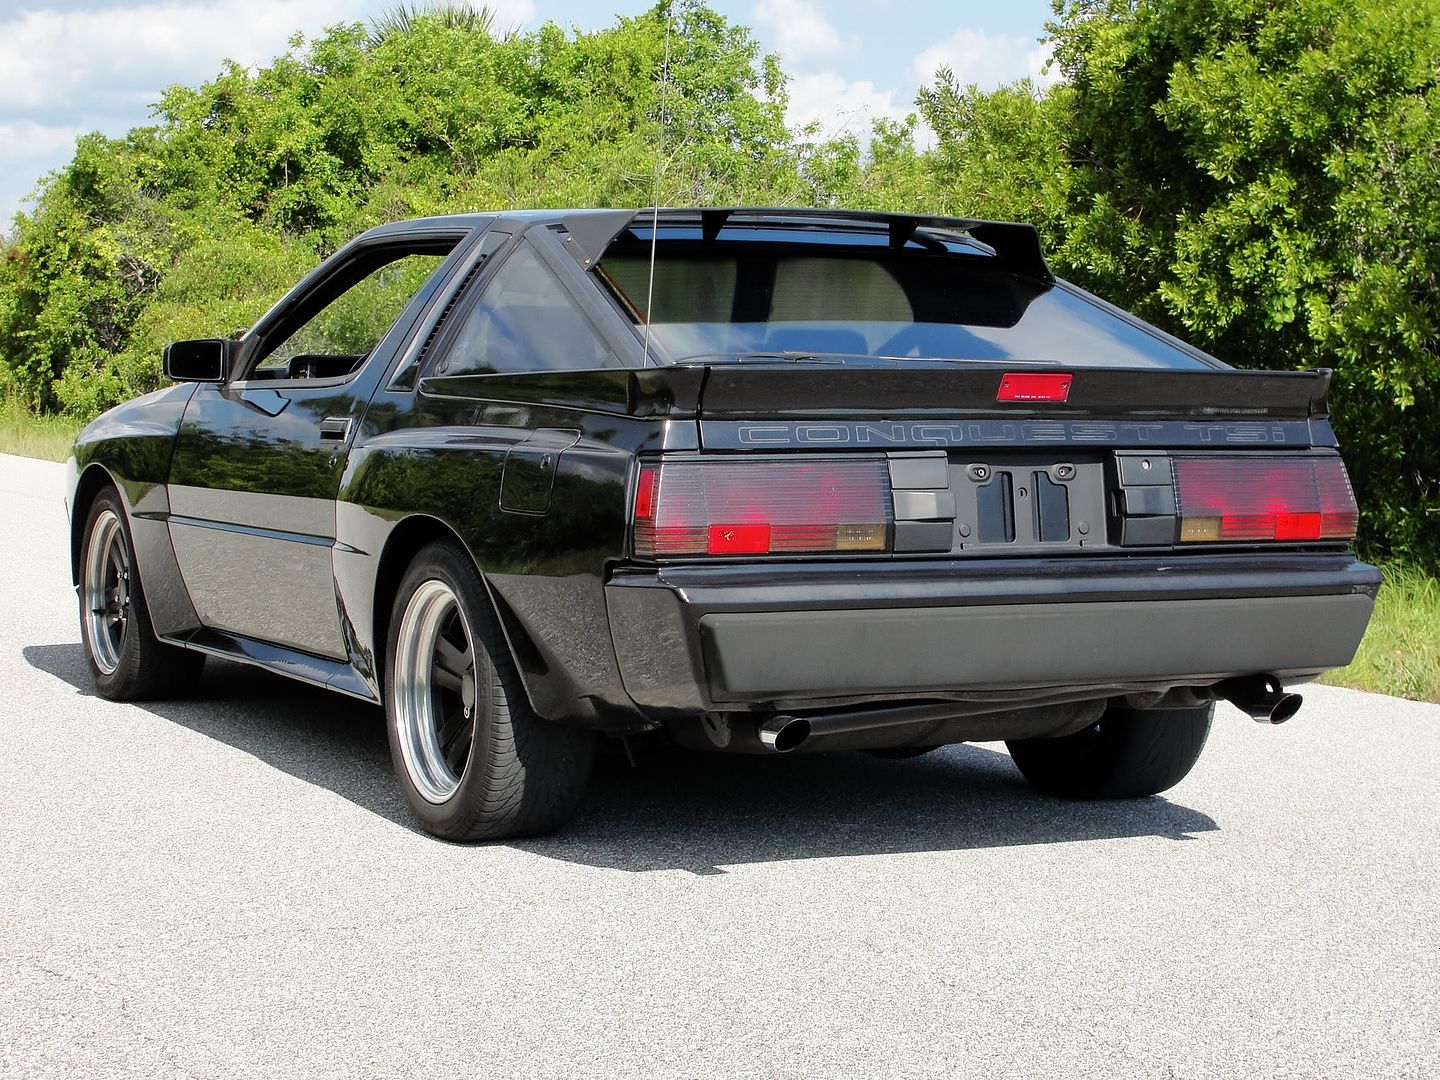 Chrysler conquest for sale in nj